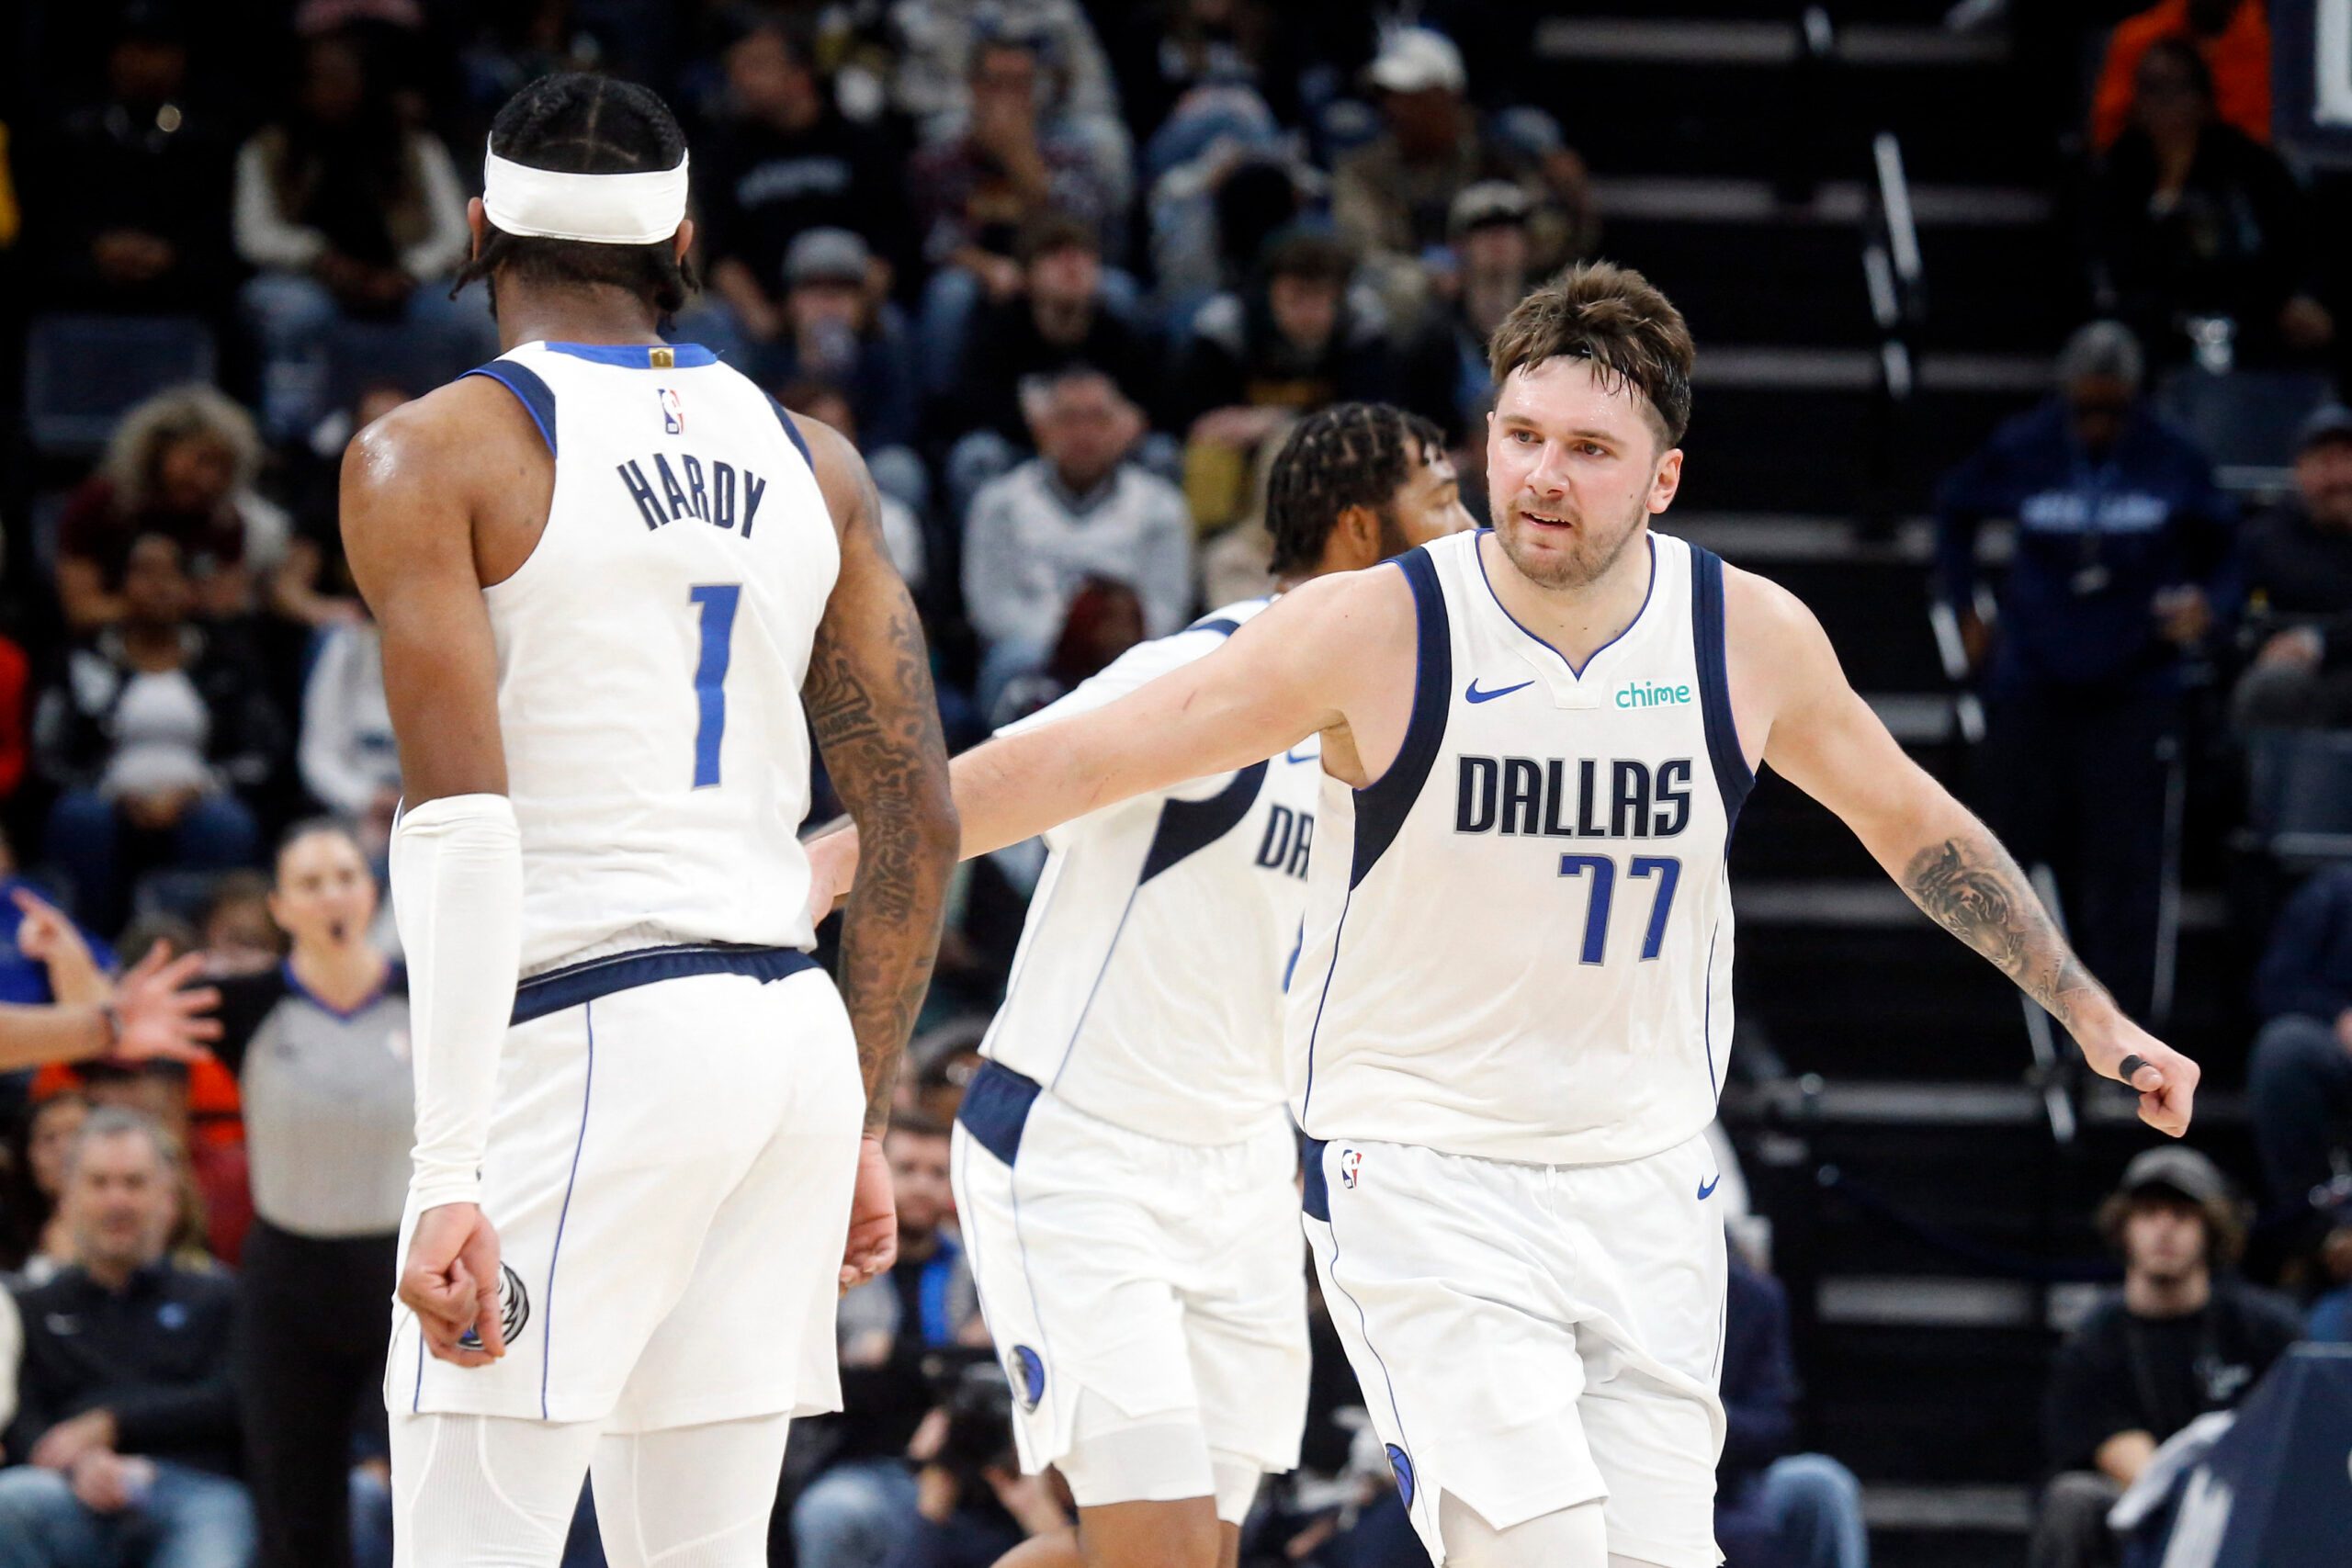 Luka Doncic, other young guns lift Mavericks to win over Grizzlies